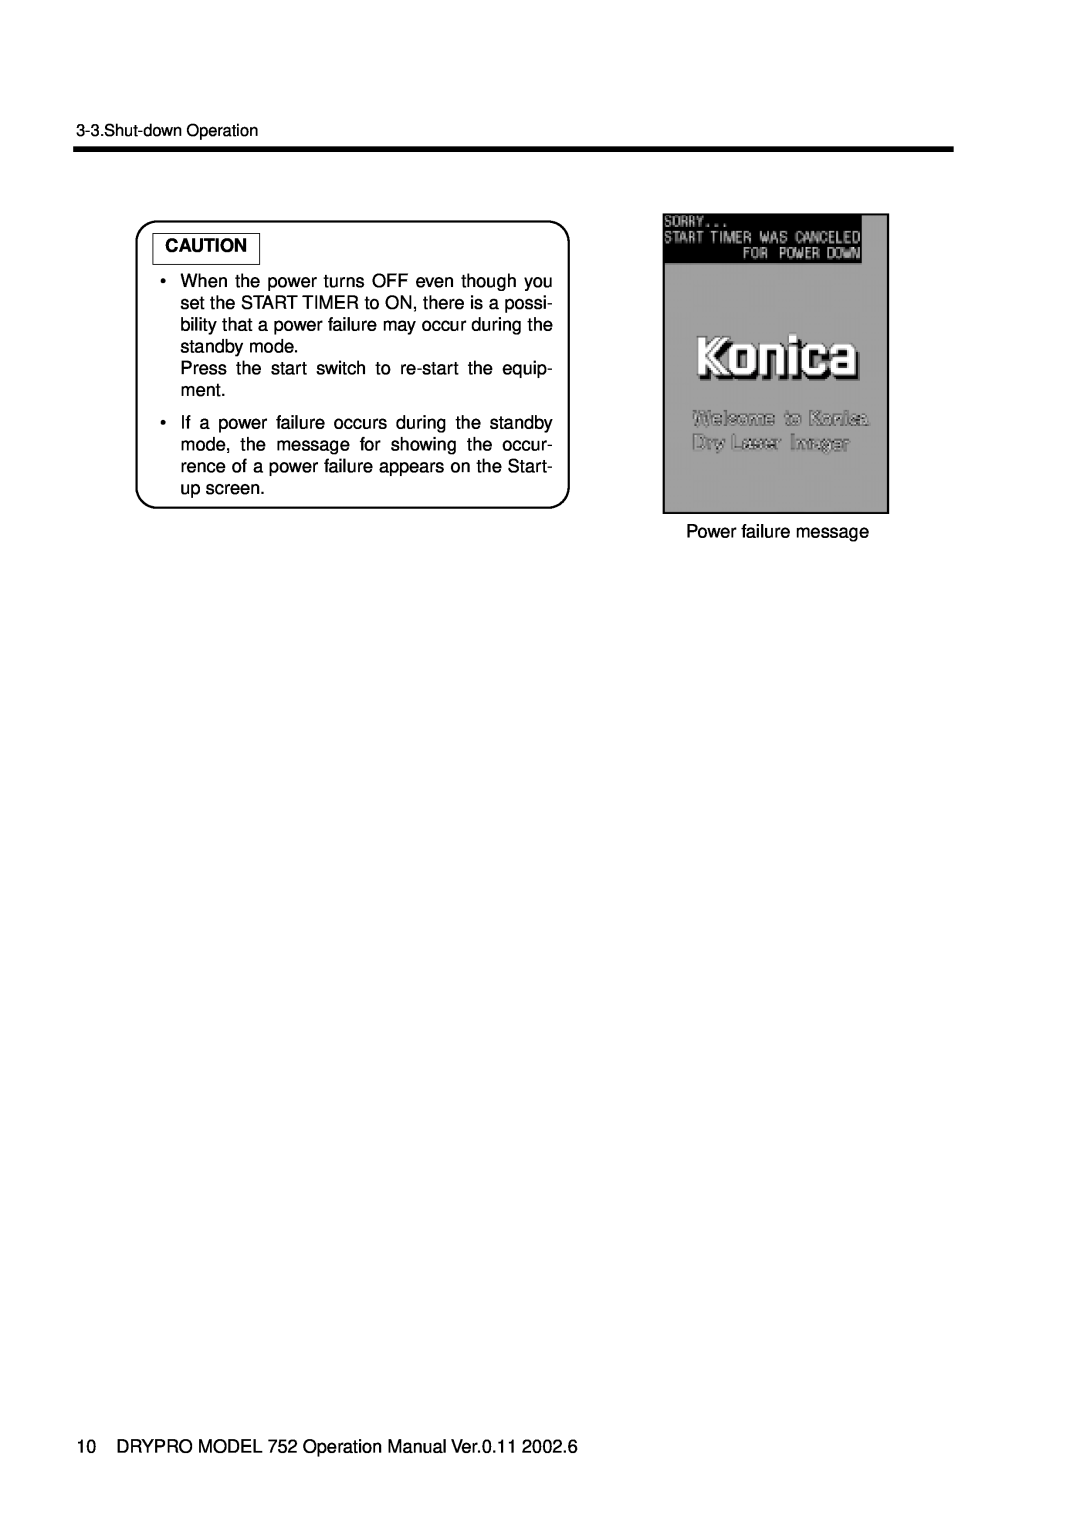 Konica Minolta 752 operation manual Press the start switch to re-start the equip- ment 